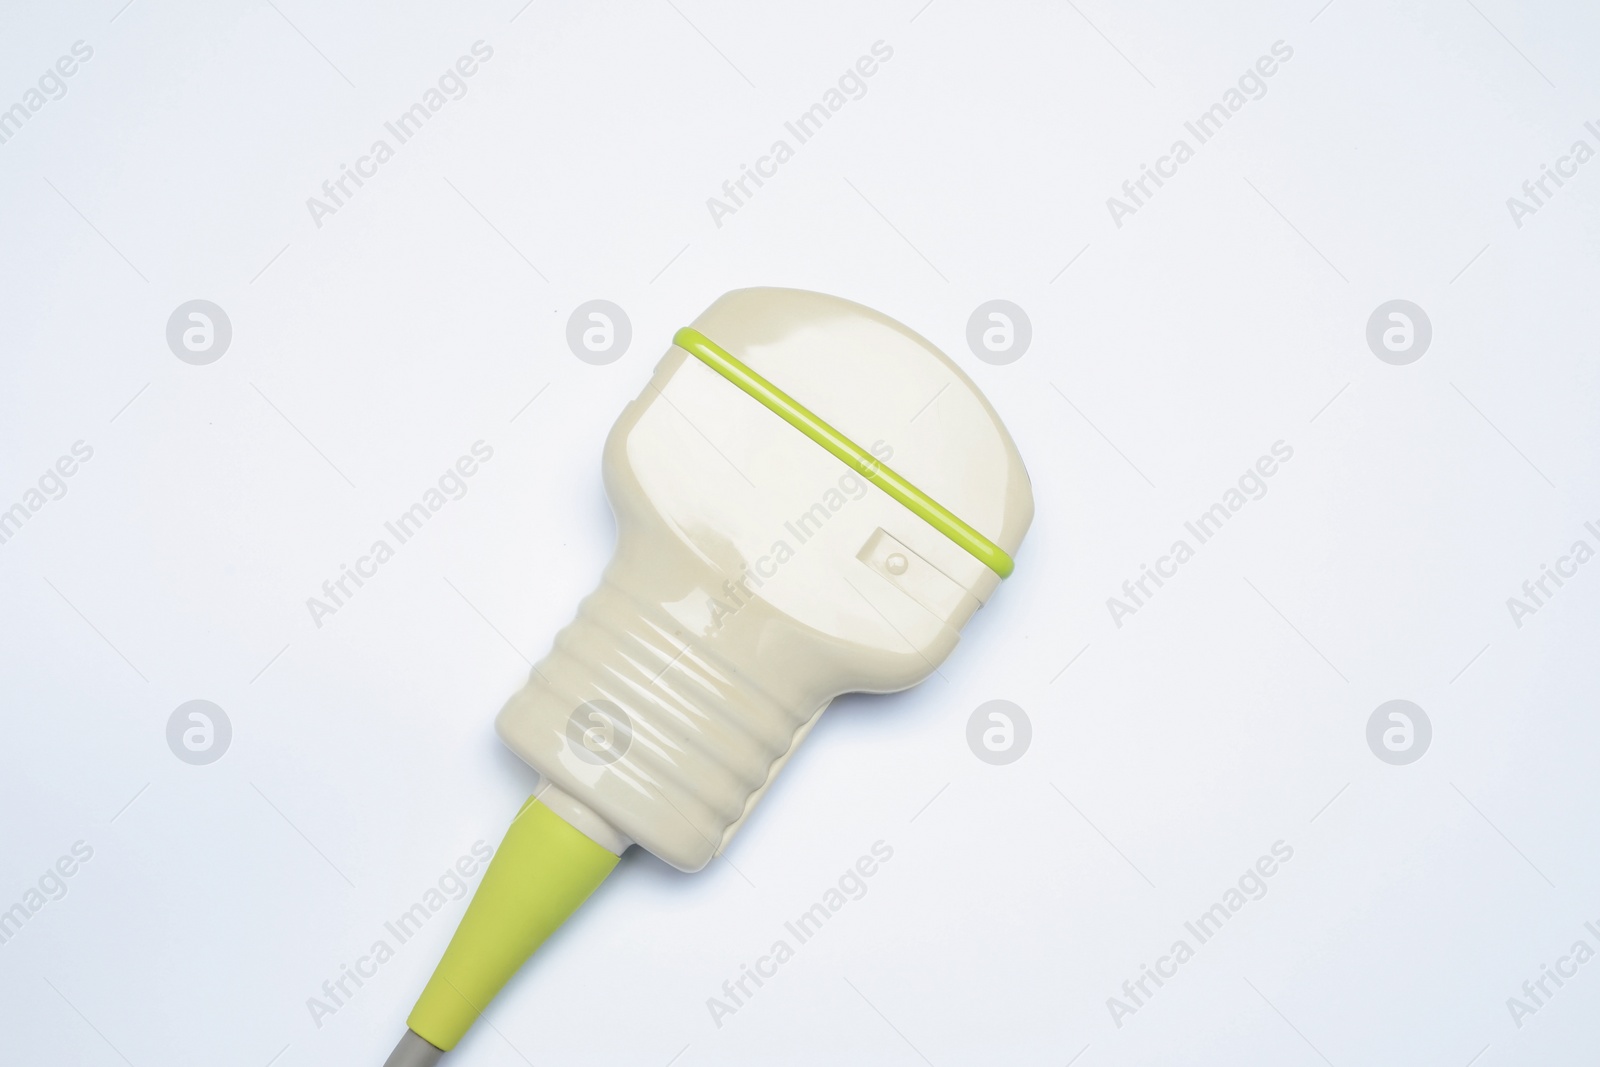 Photo of Ultrasonic transducer on light background, top view